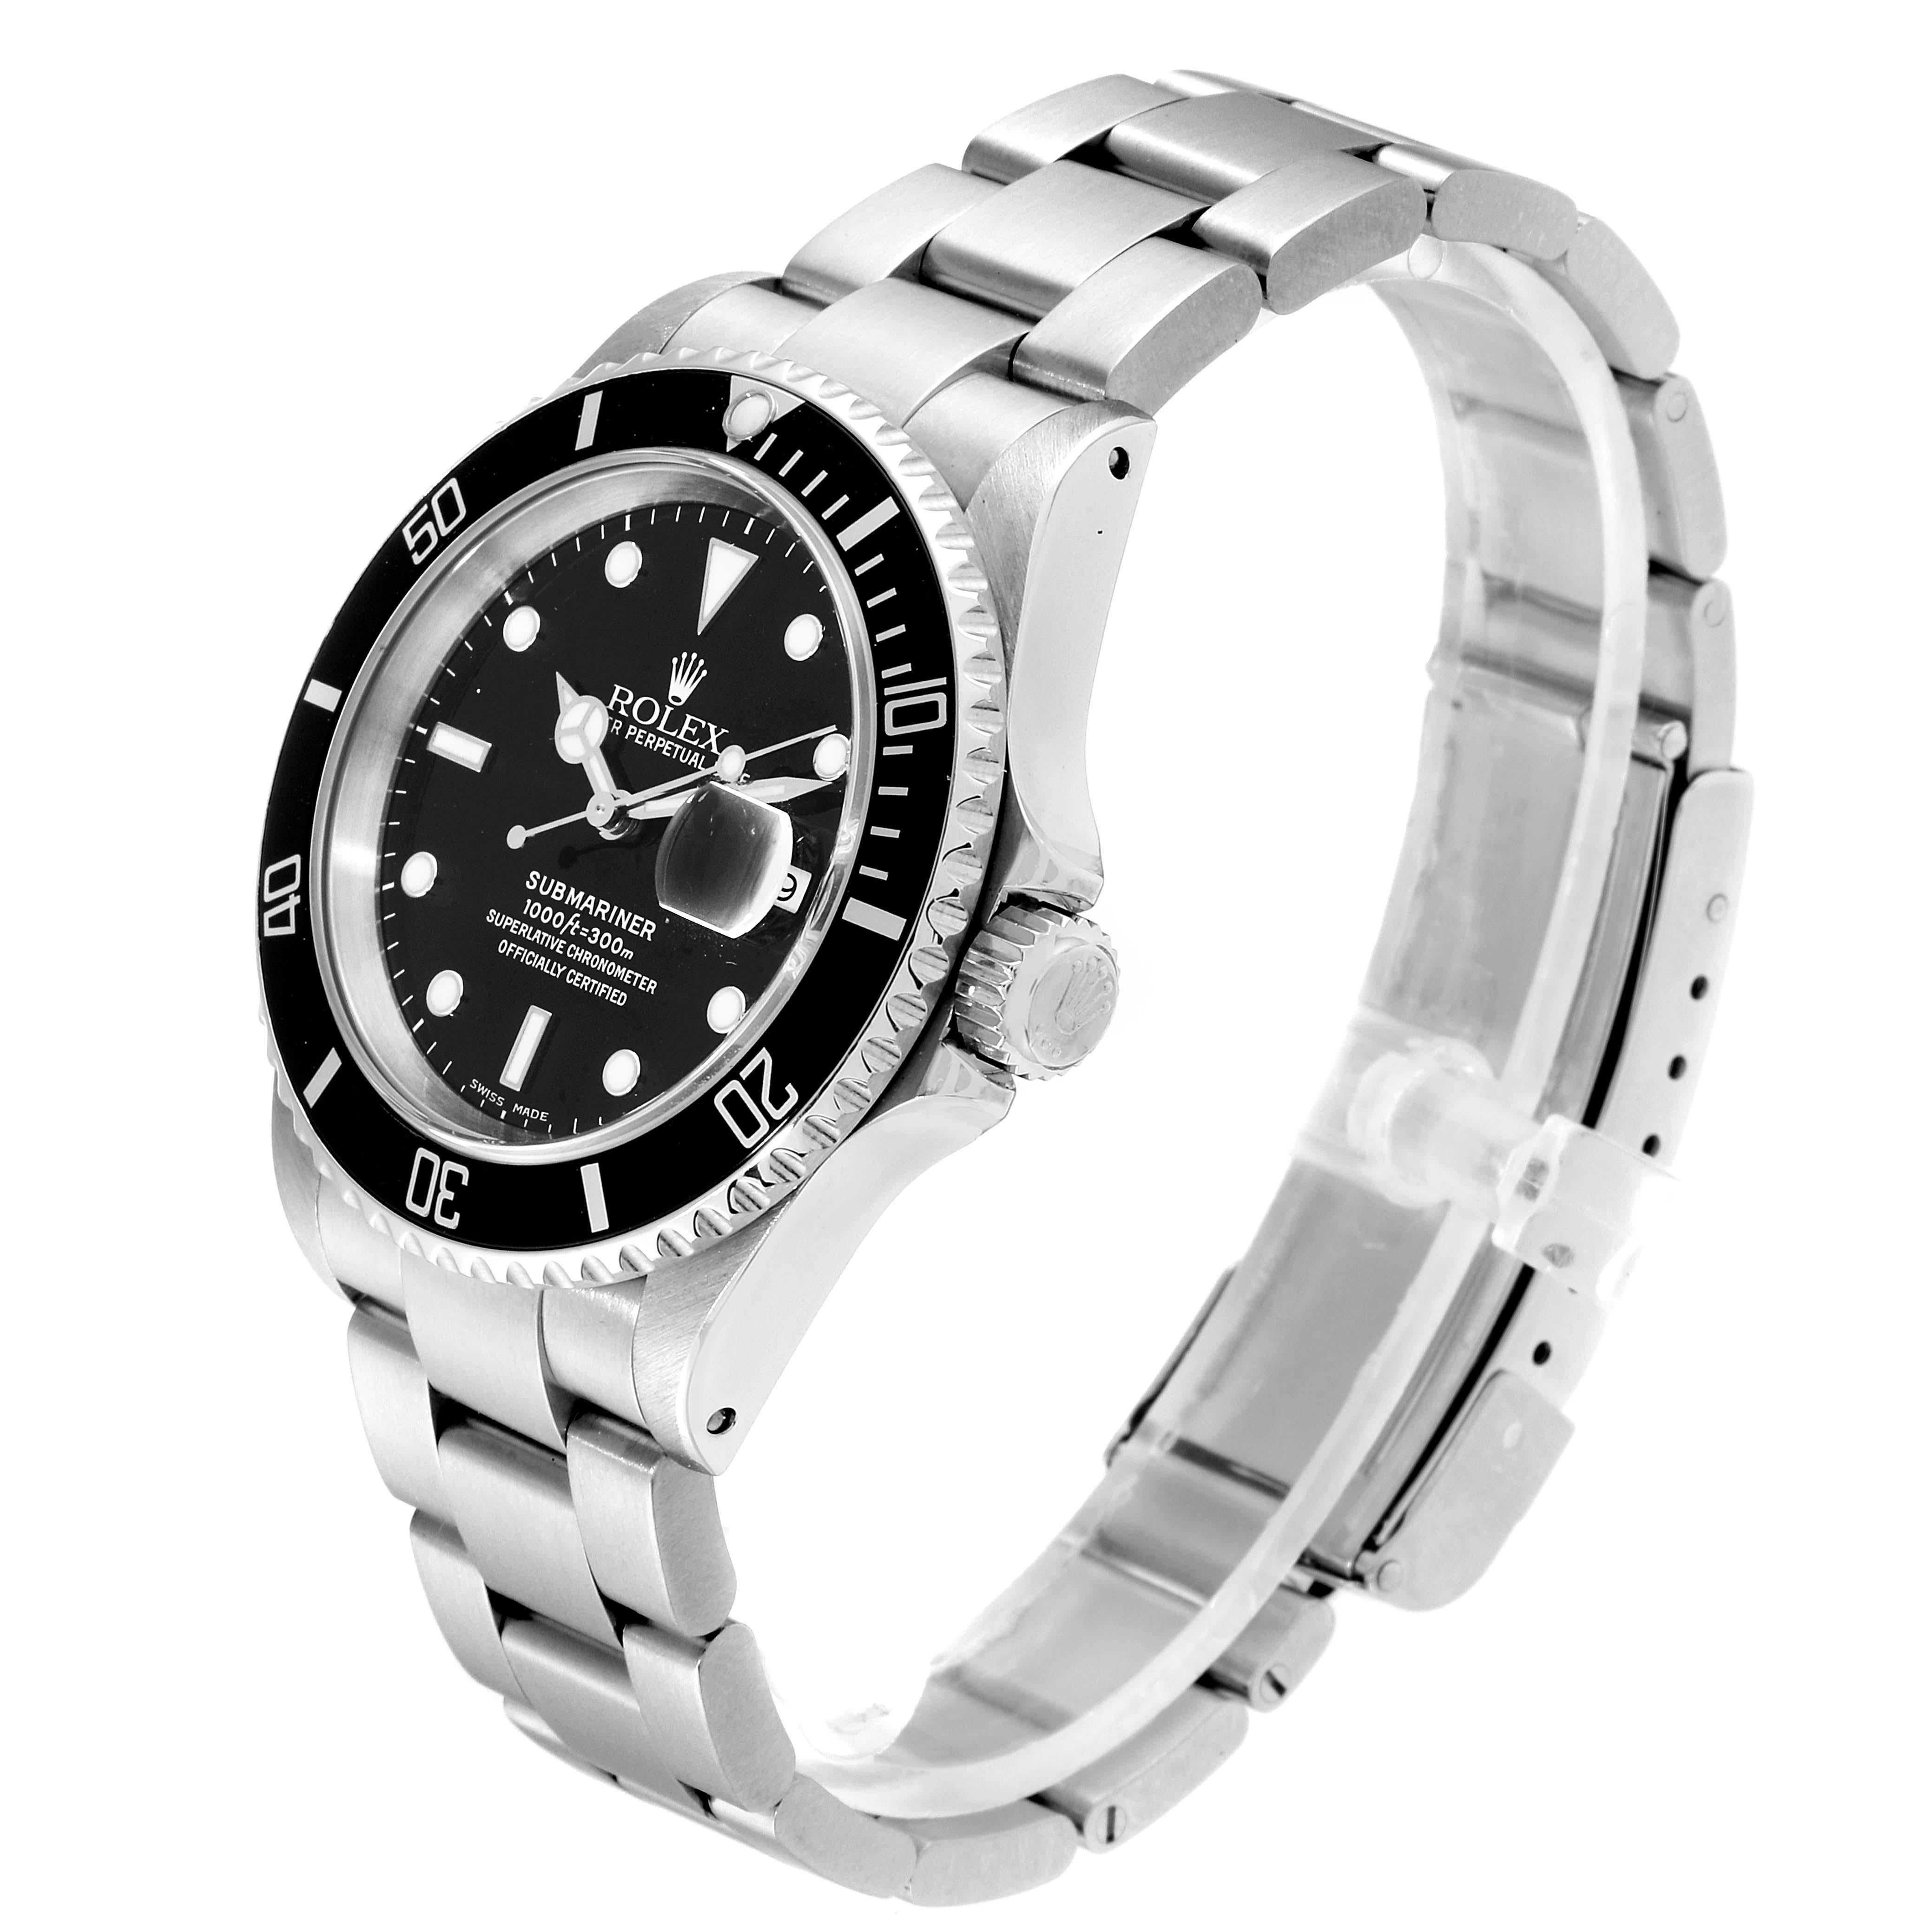 Rolex Submariner Date Stainless Steel Men's Watch 16610 Box Papers 1